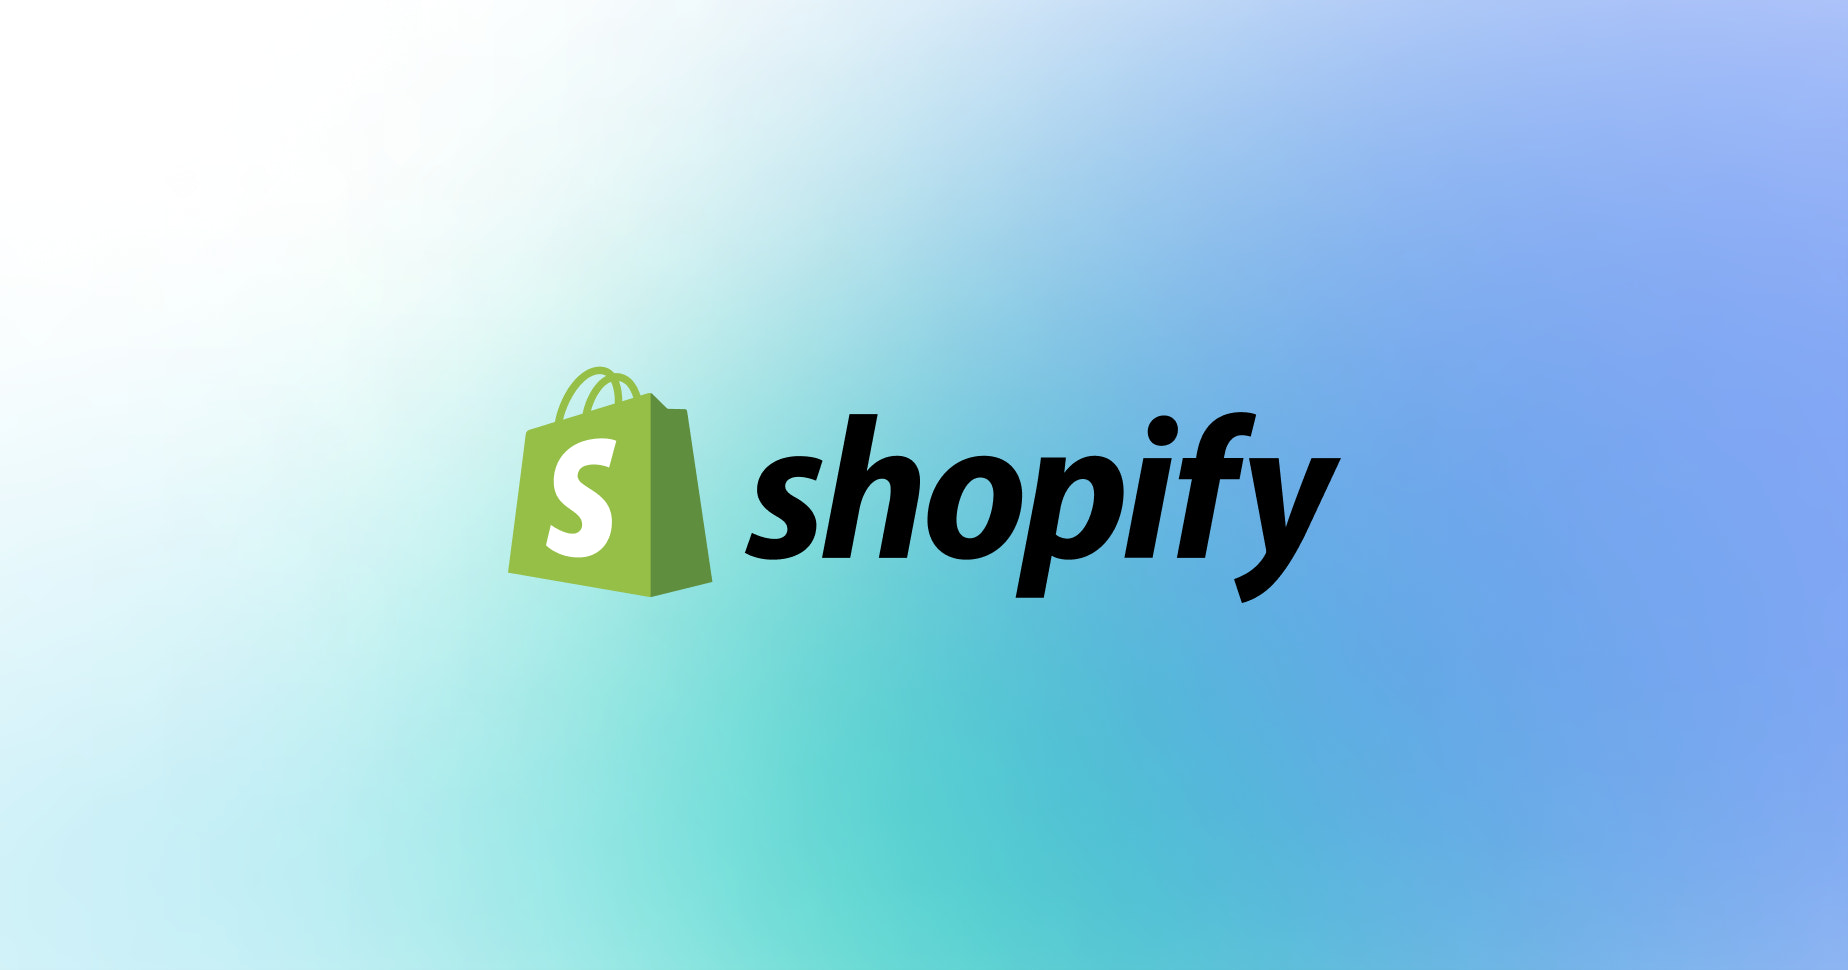 Shopify Pricing, Fees & Plans 2023